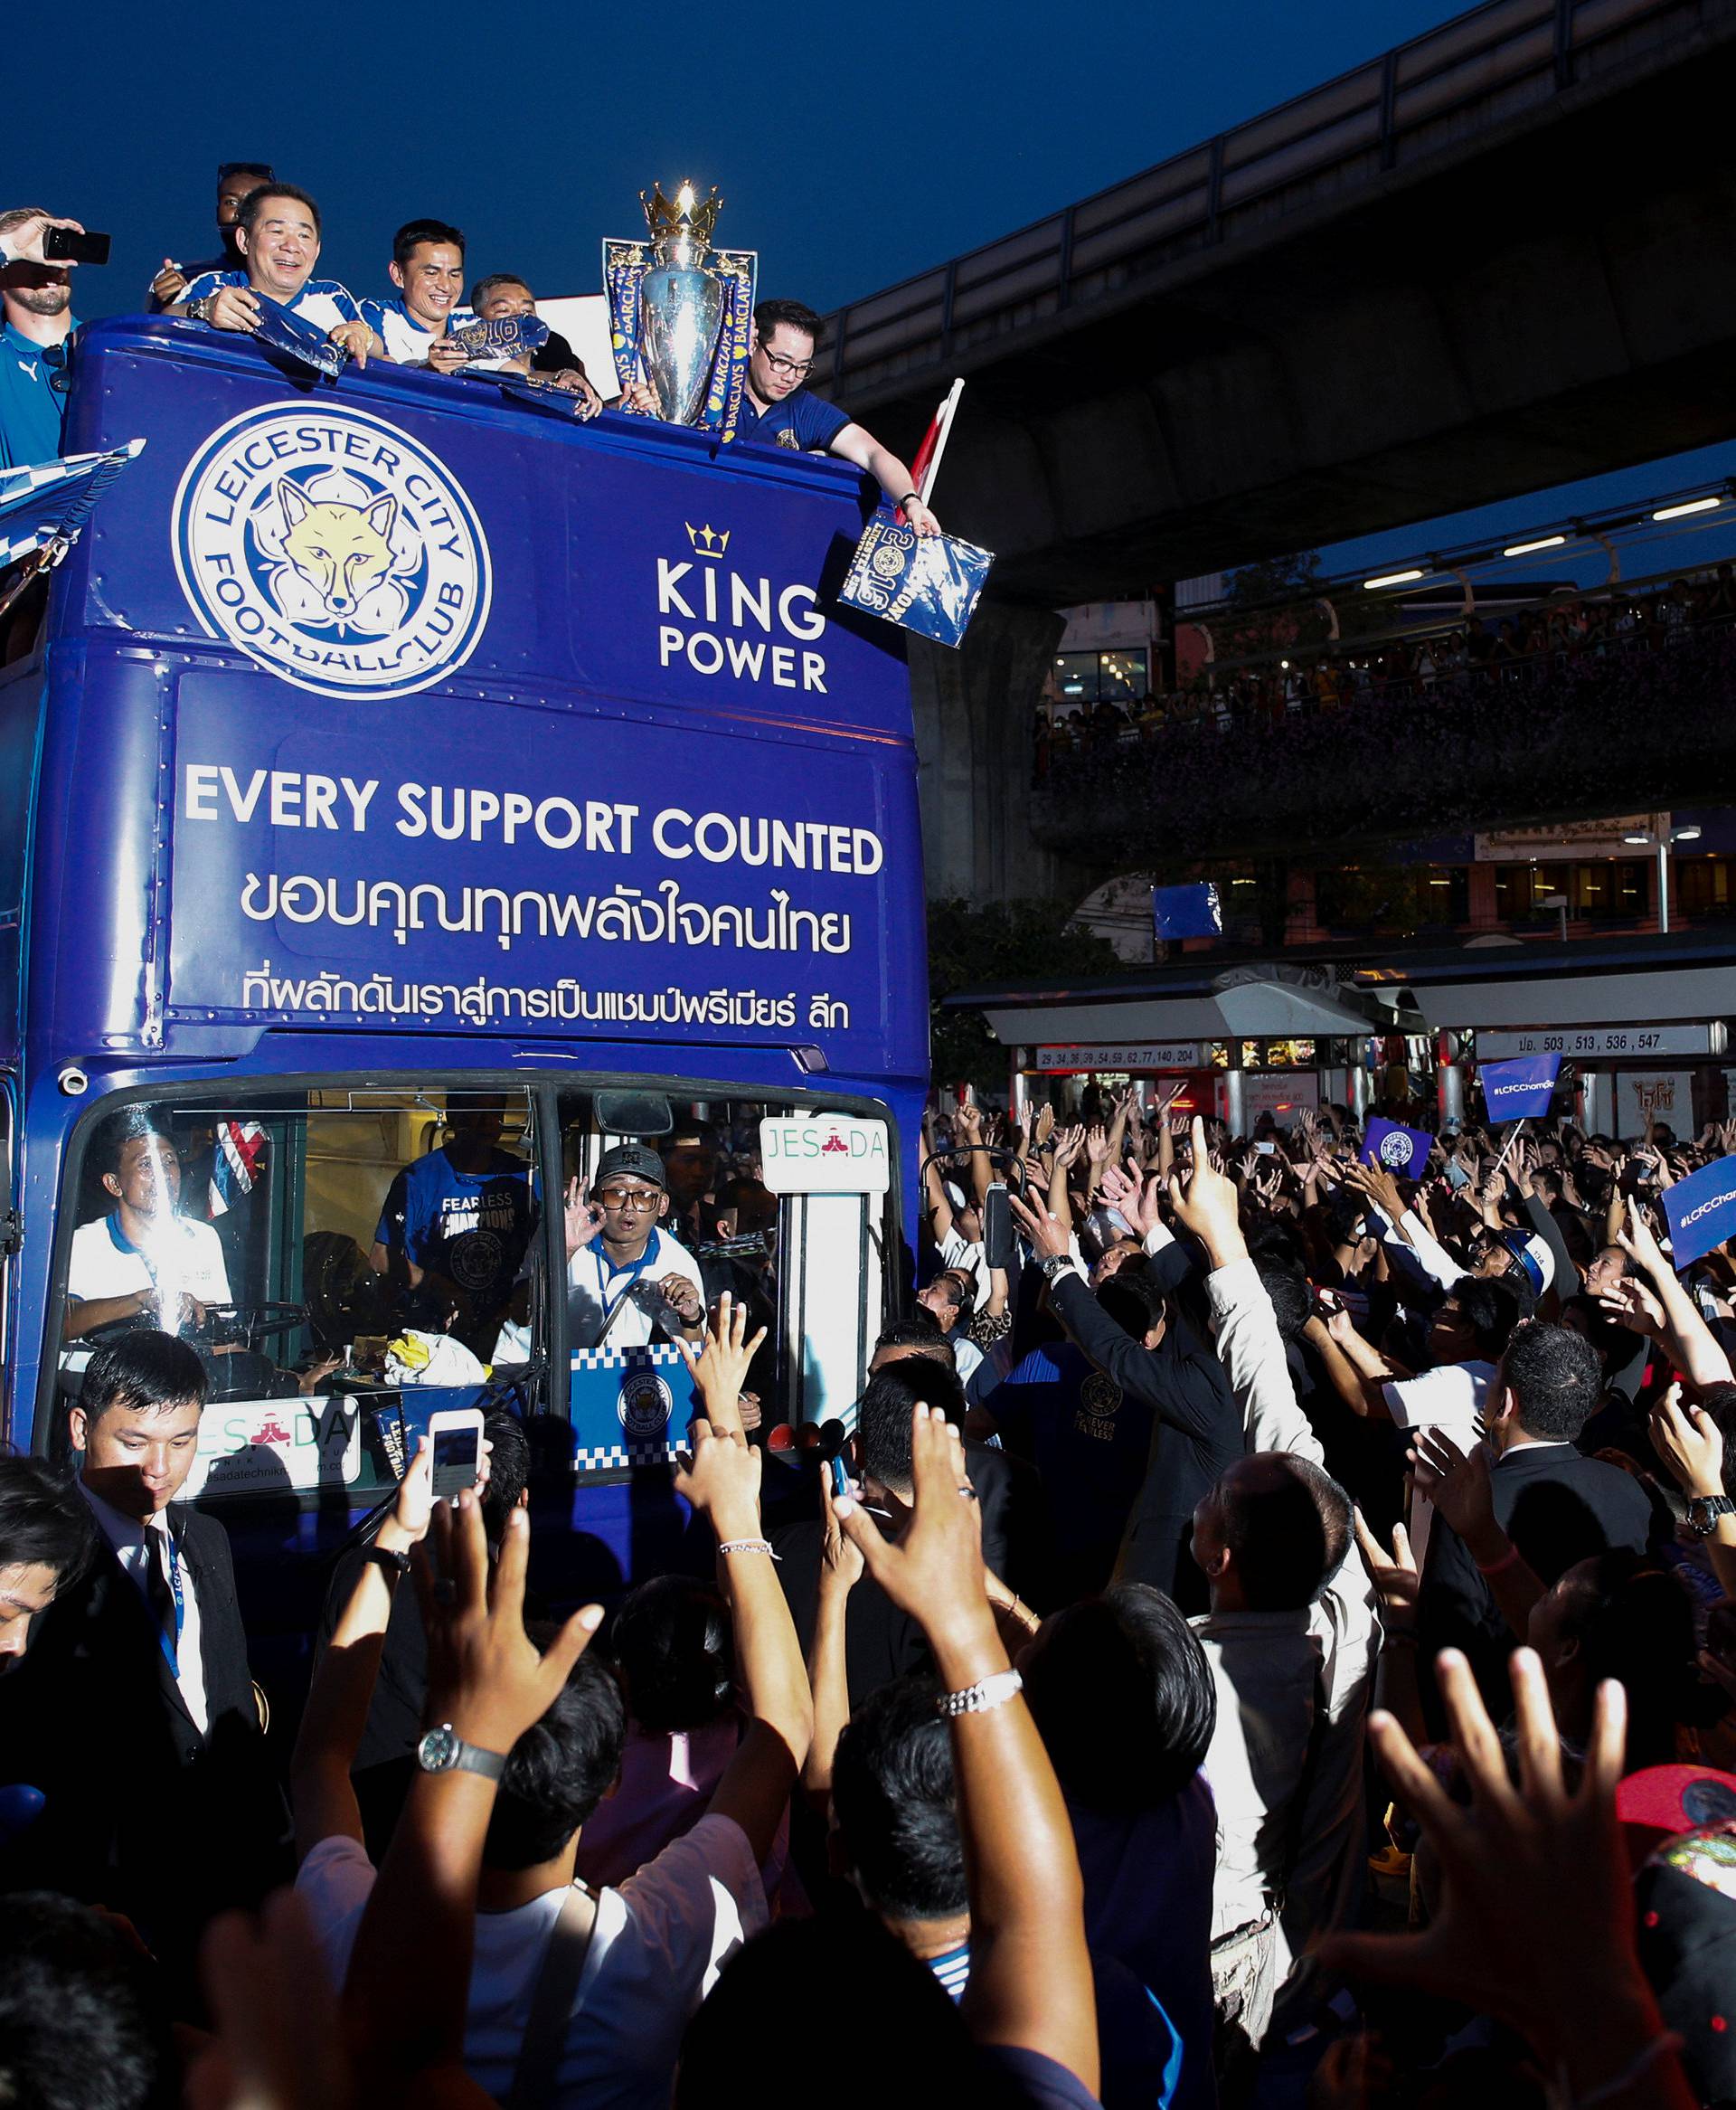 Leicester City soccer club's team members parade to celebrate club's English Premier League title in Bangkok